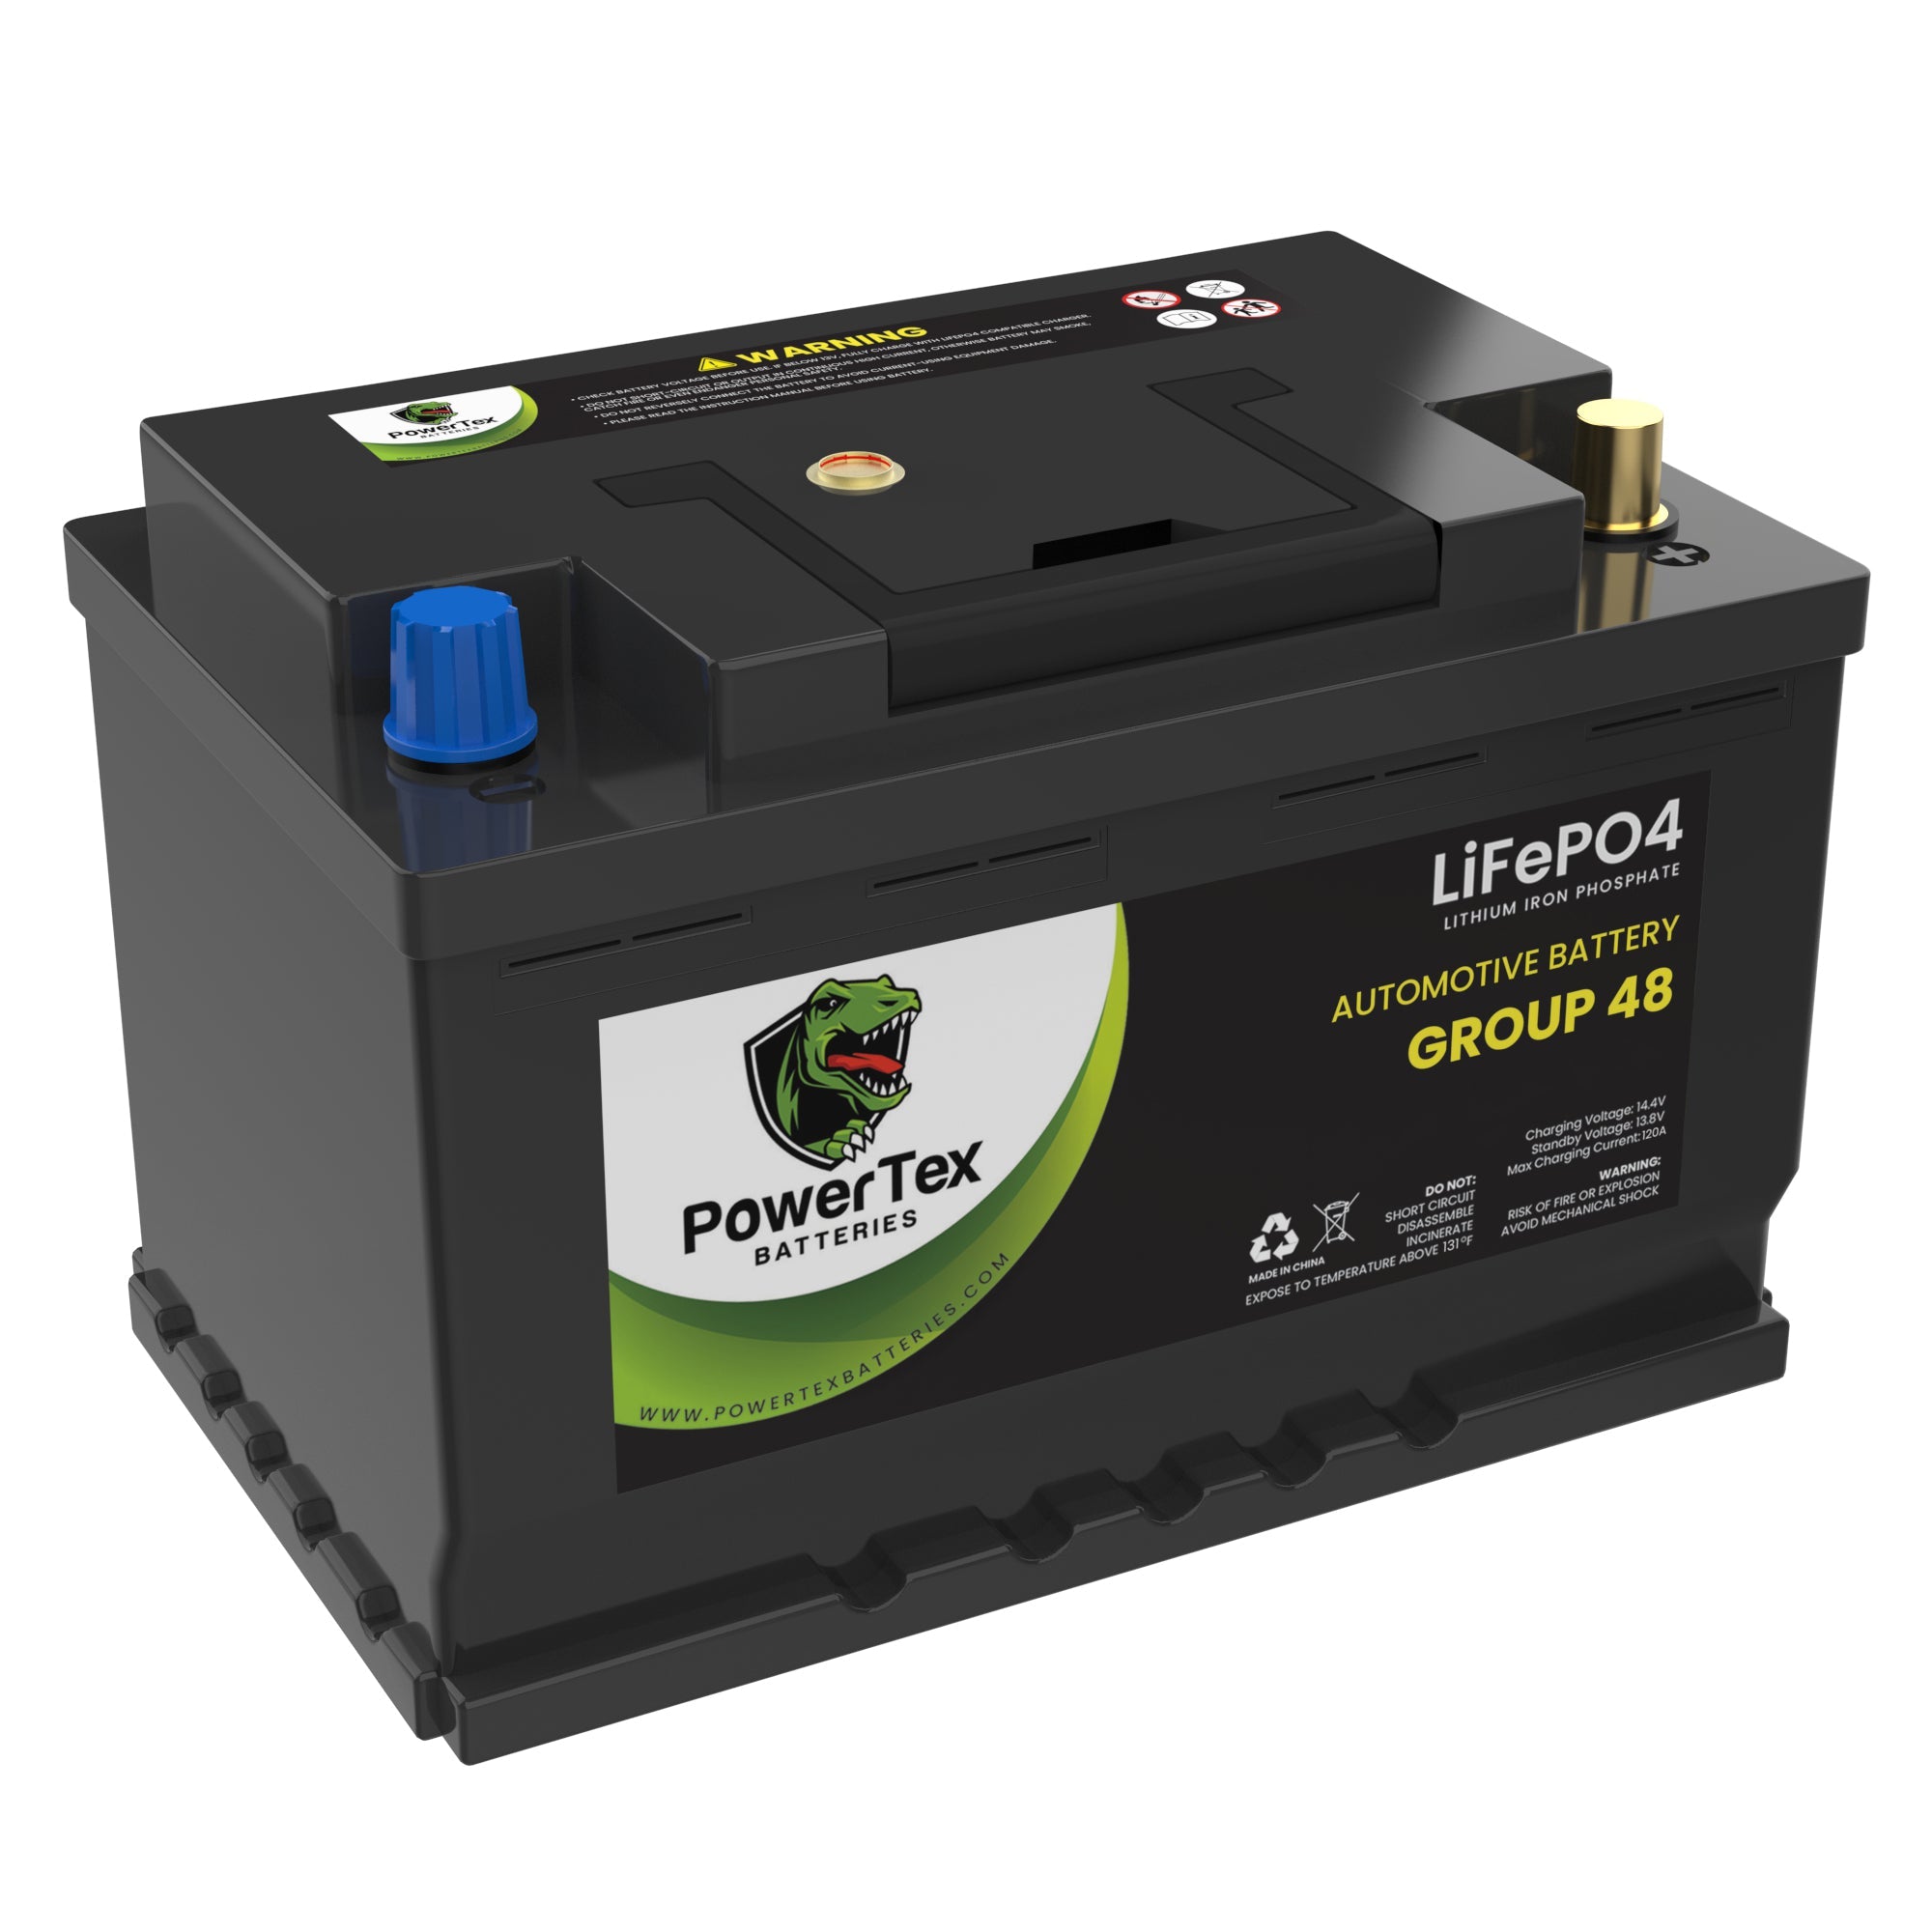 2011 Freightliner Sprinter 2500 Car Battery BCI Group 48 / H6 Lithium LiFePO4 Automotive Battery